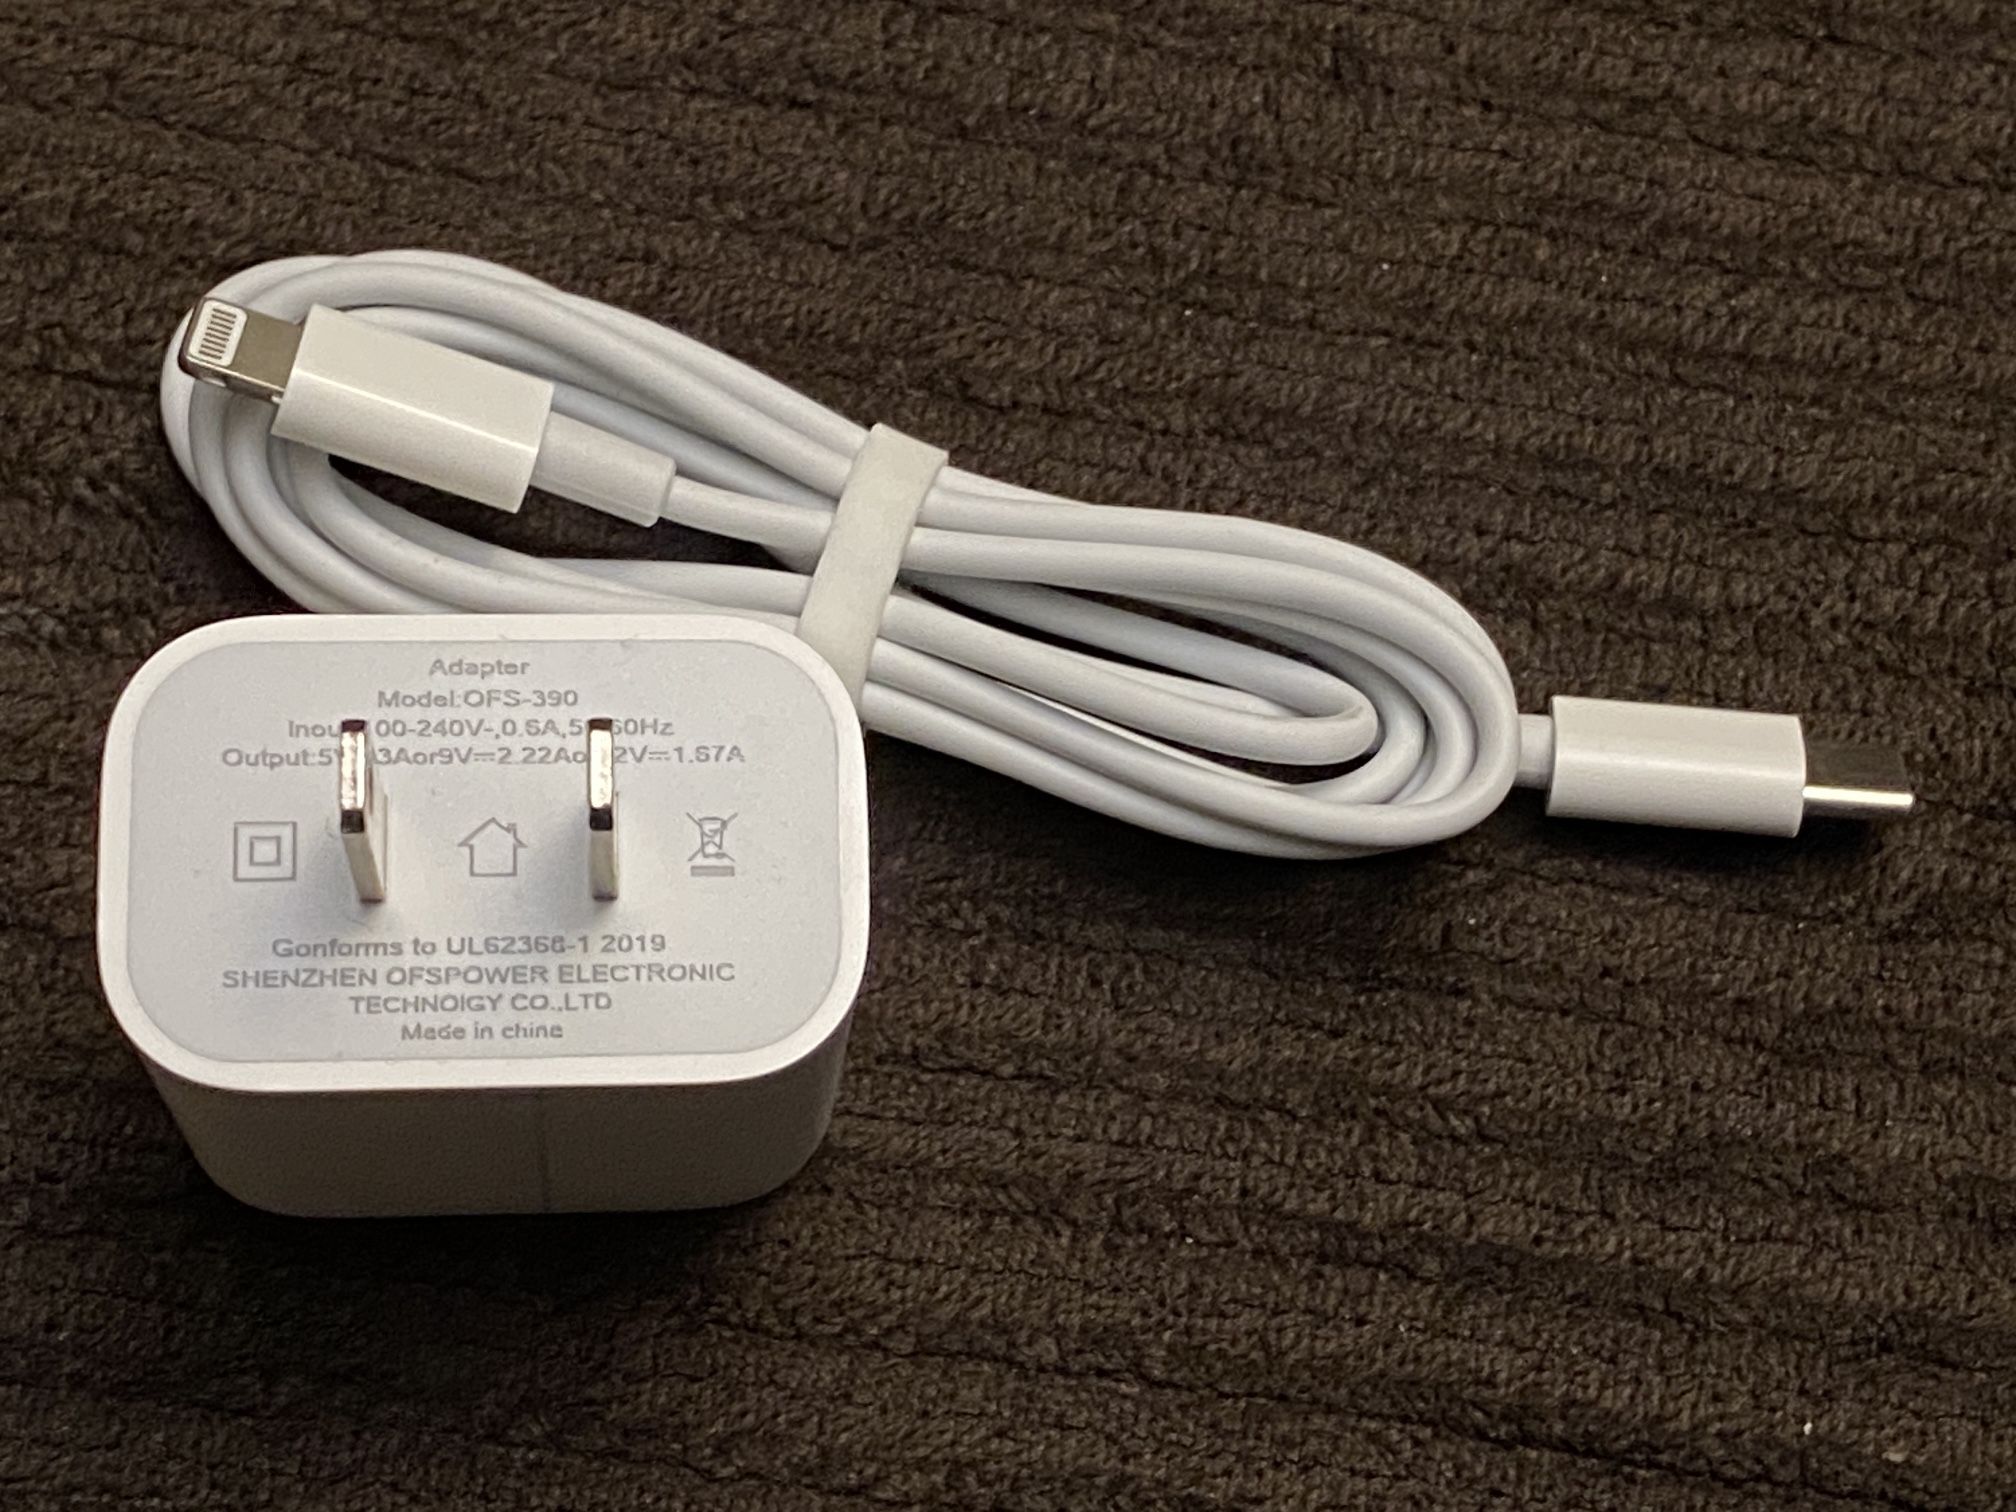 Brand New iPhone charger set (charger and cable)